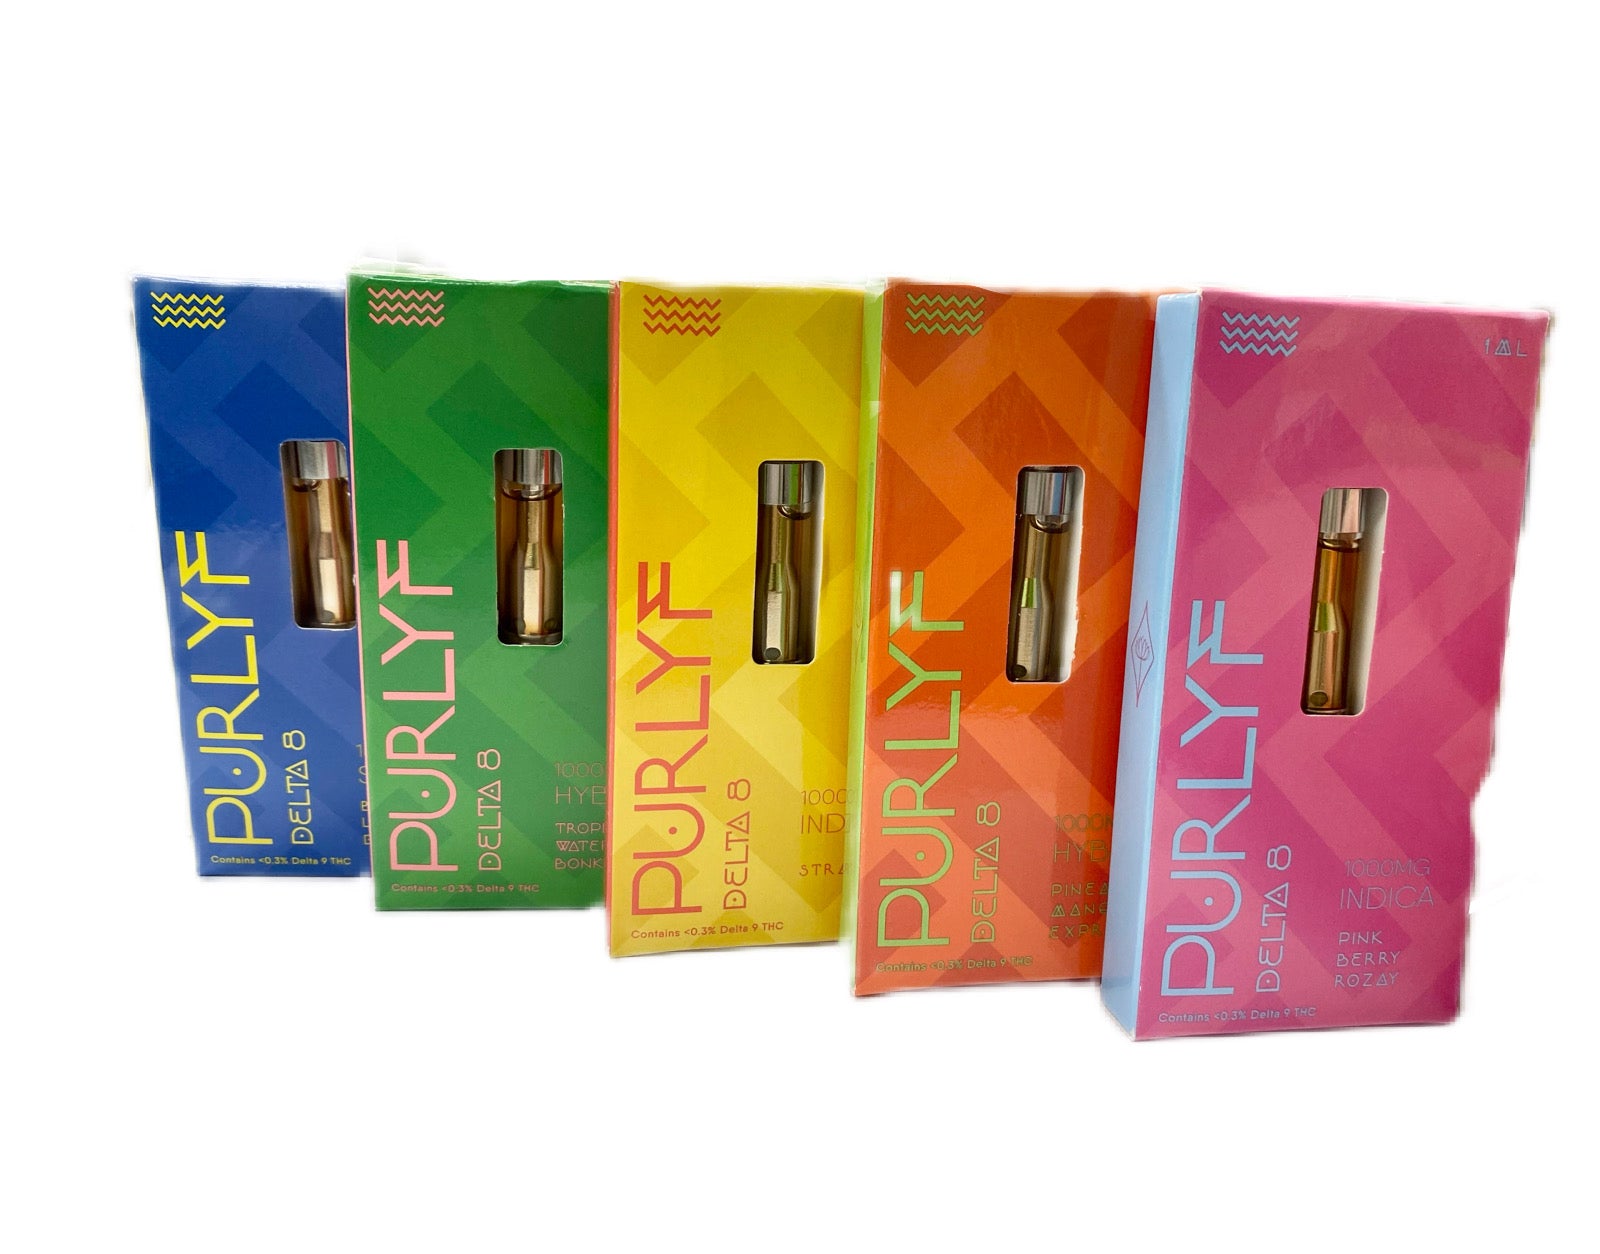 Purlyf Delta 8 THC Vape Cartridge, 510 threaded Cartridge, Group picture $14.99 available in Omaha, Nebraska or Online at Delta8emporium.co 